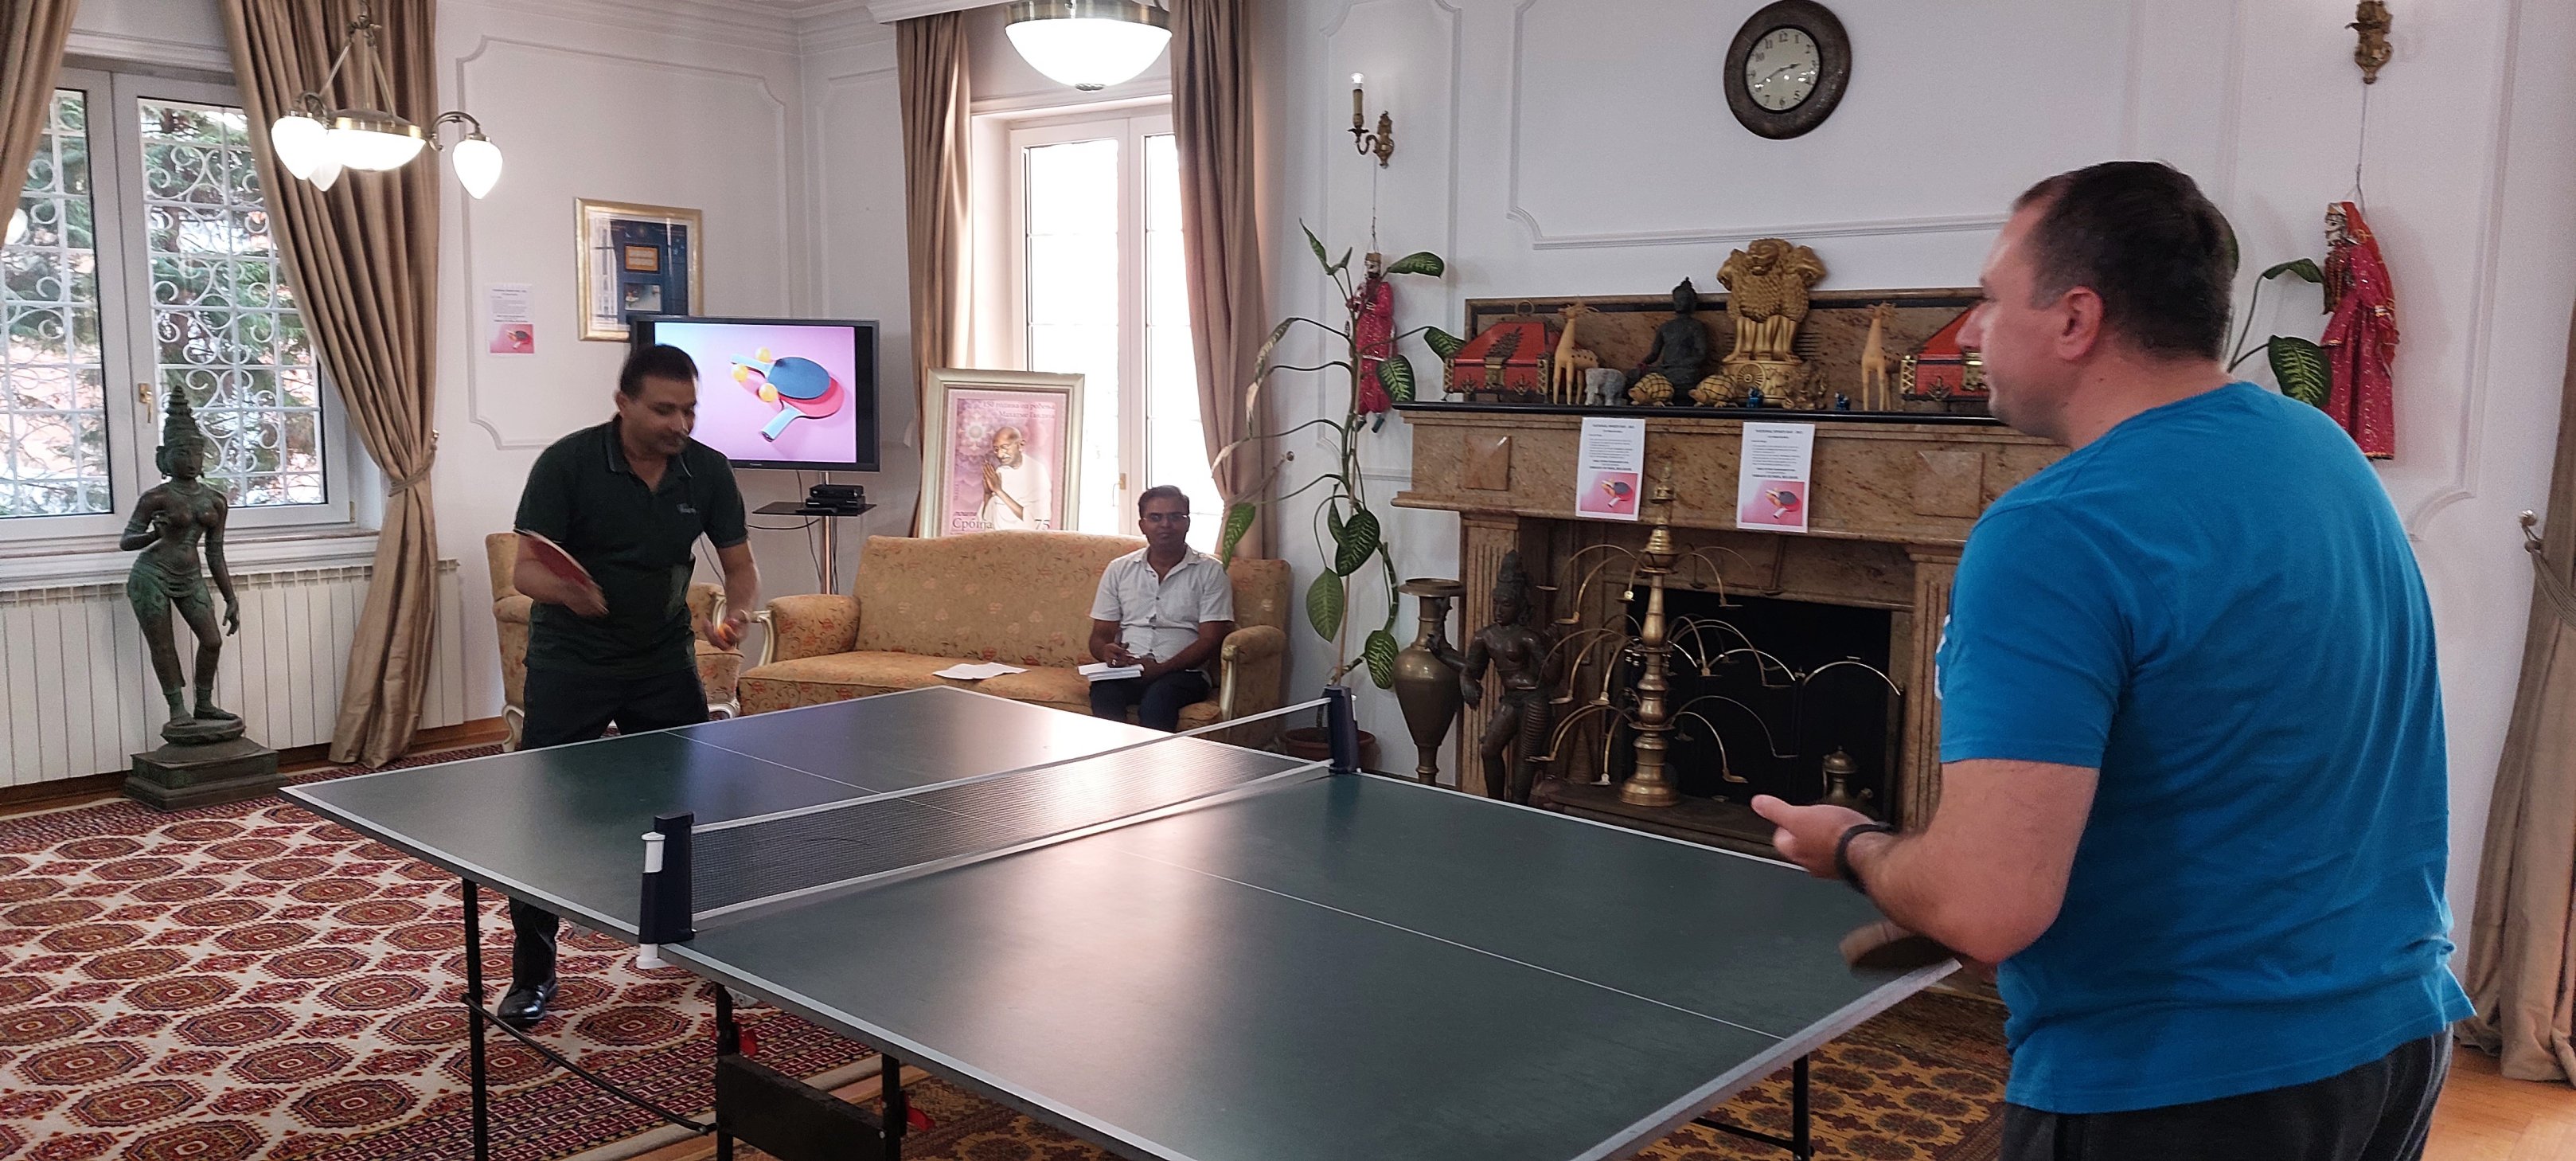 Embassy of India in Belgrade organized Table Tennis tournament for fun and fitness to celebrate National Sports Day with the theme “Sports as an enabler for on inclusive and fit society” - 29 August 2023